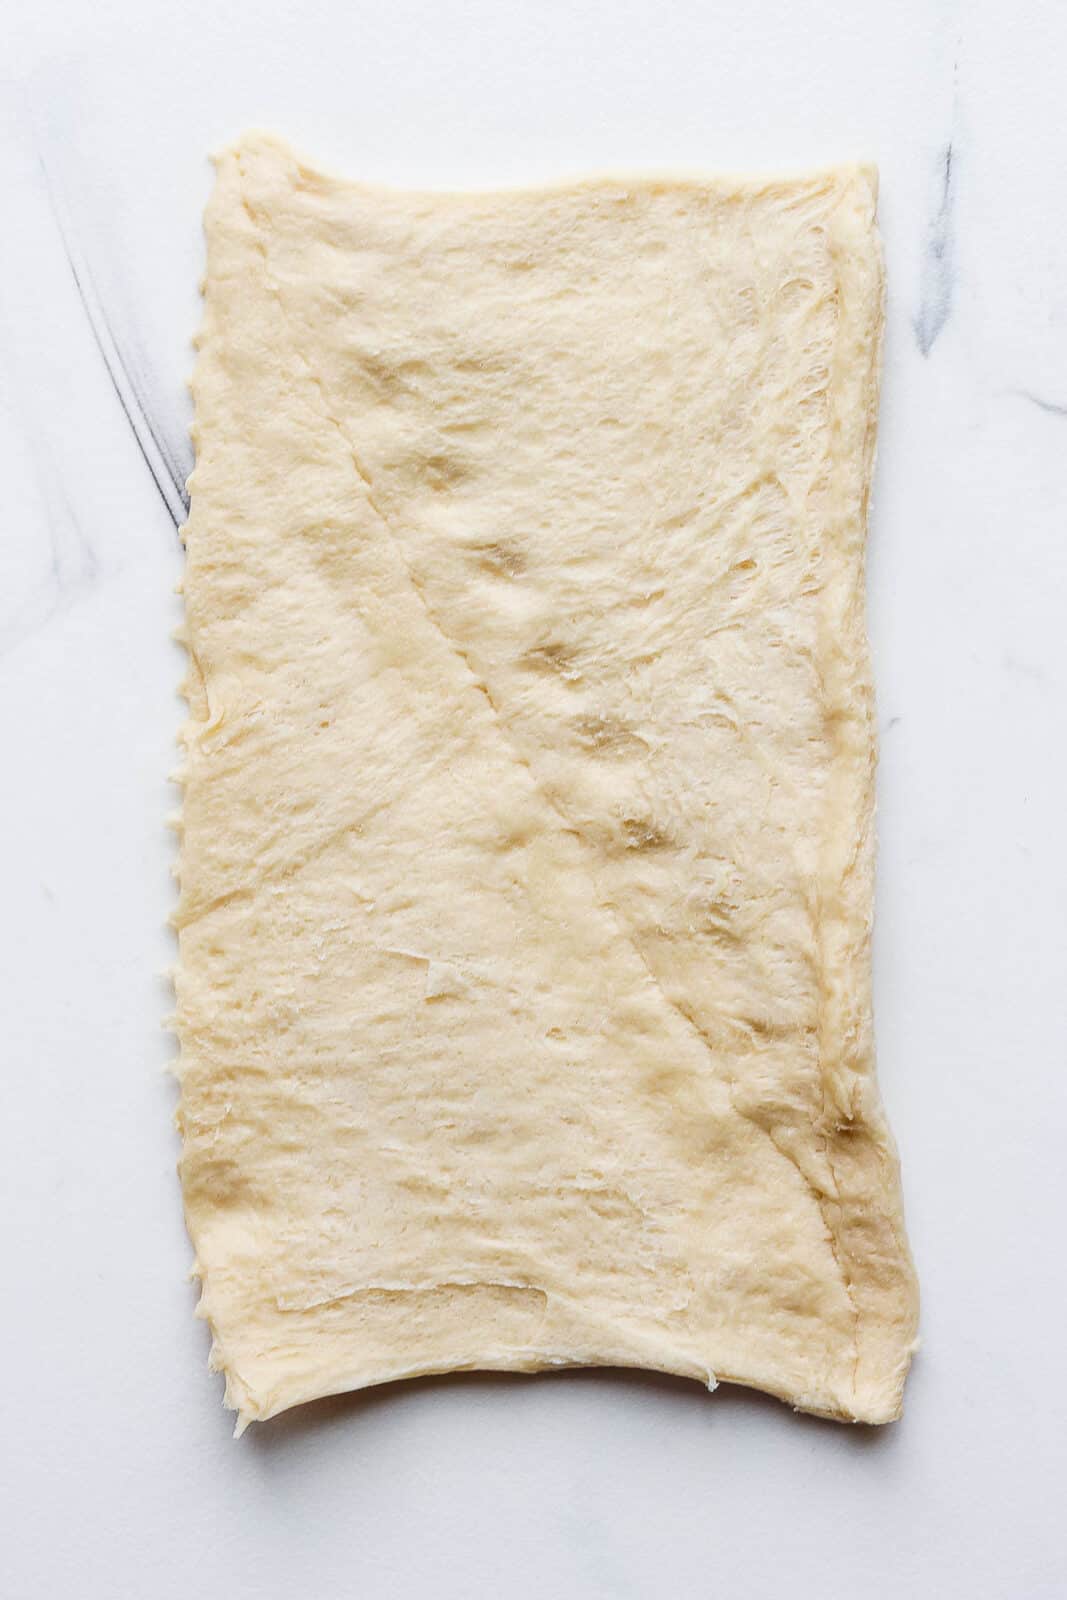 A piece of store-bought crescent roll dough with the seam pinched together to make one bigger piece.